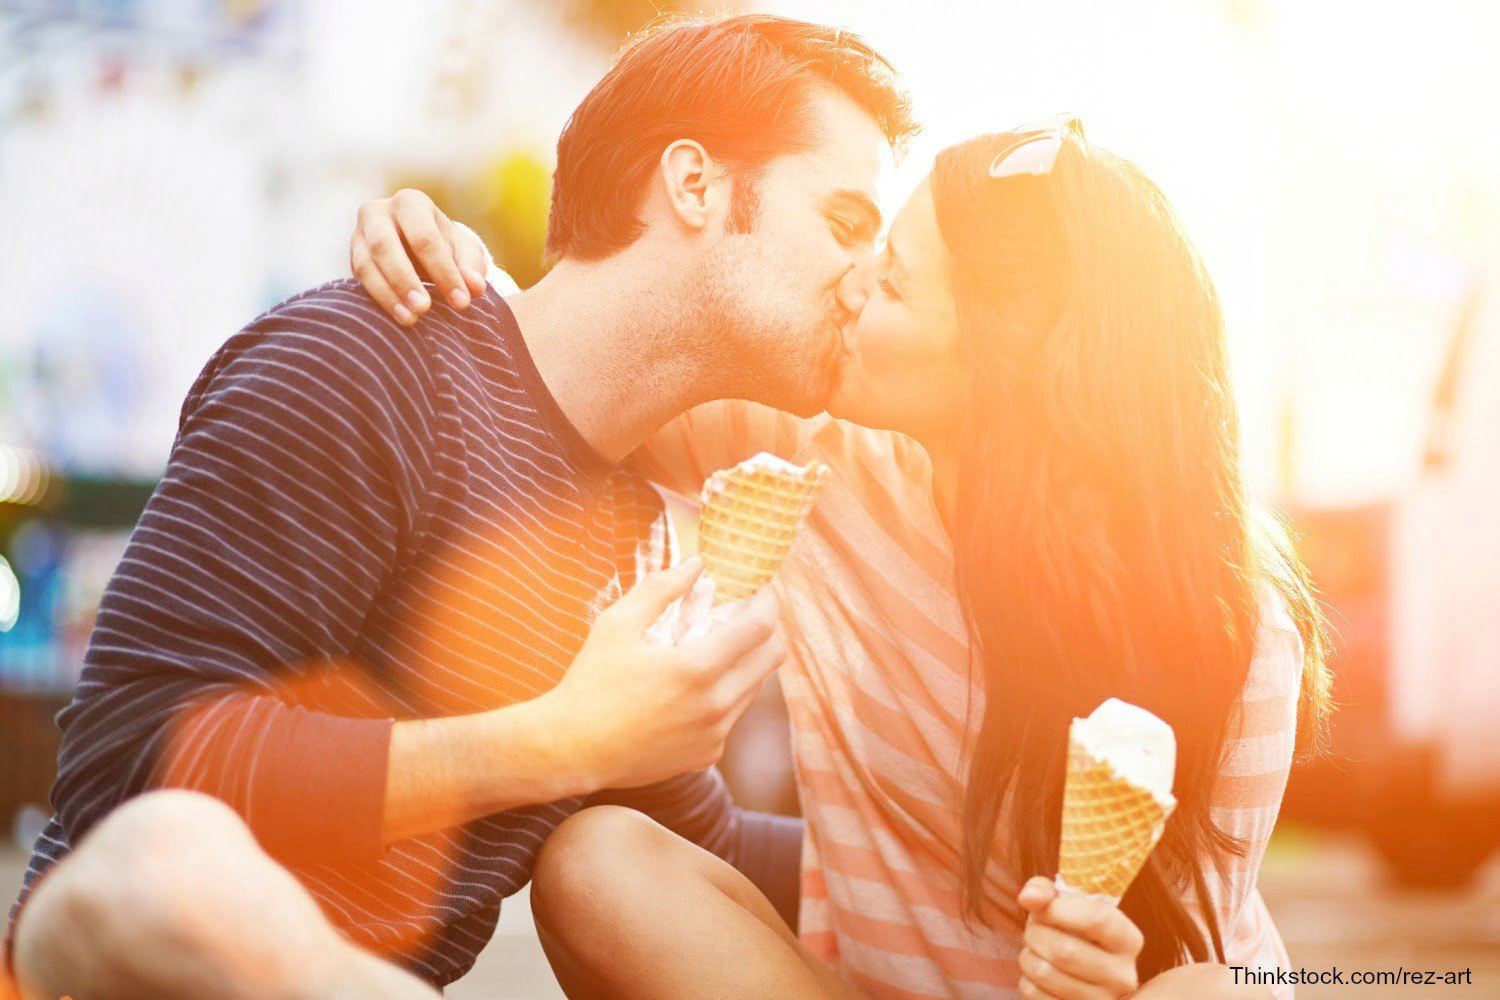 couple enjoying icecream together | Fun things to do in Ohio for couples